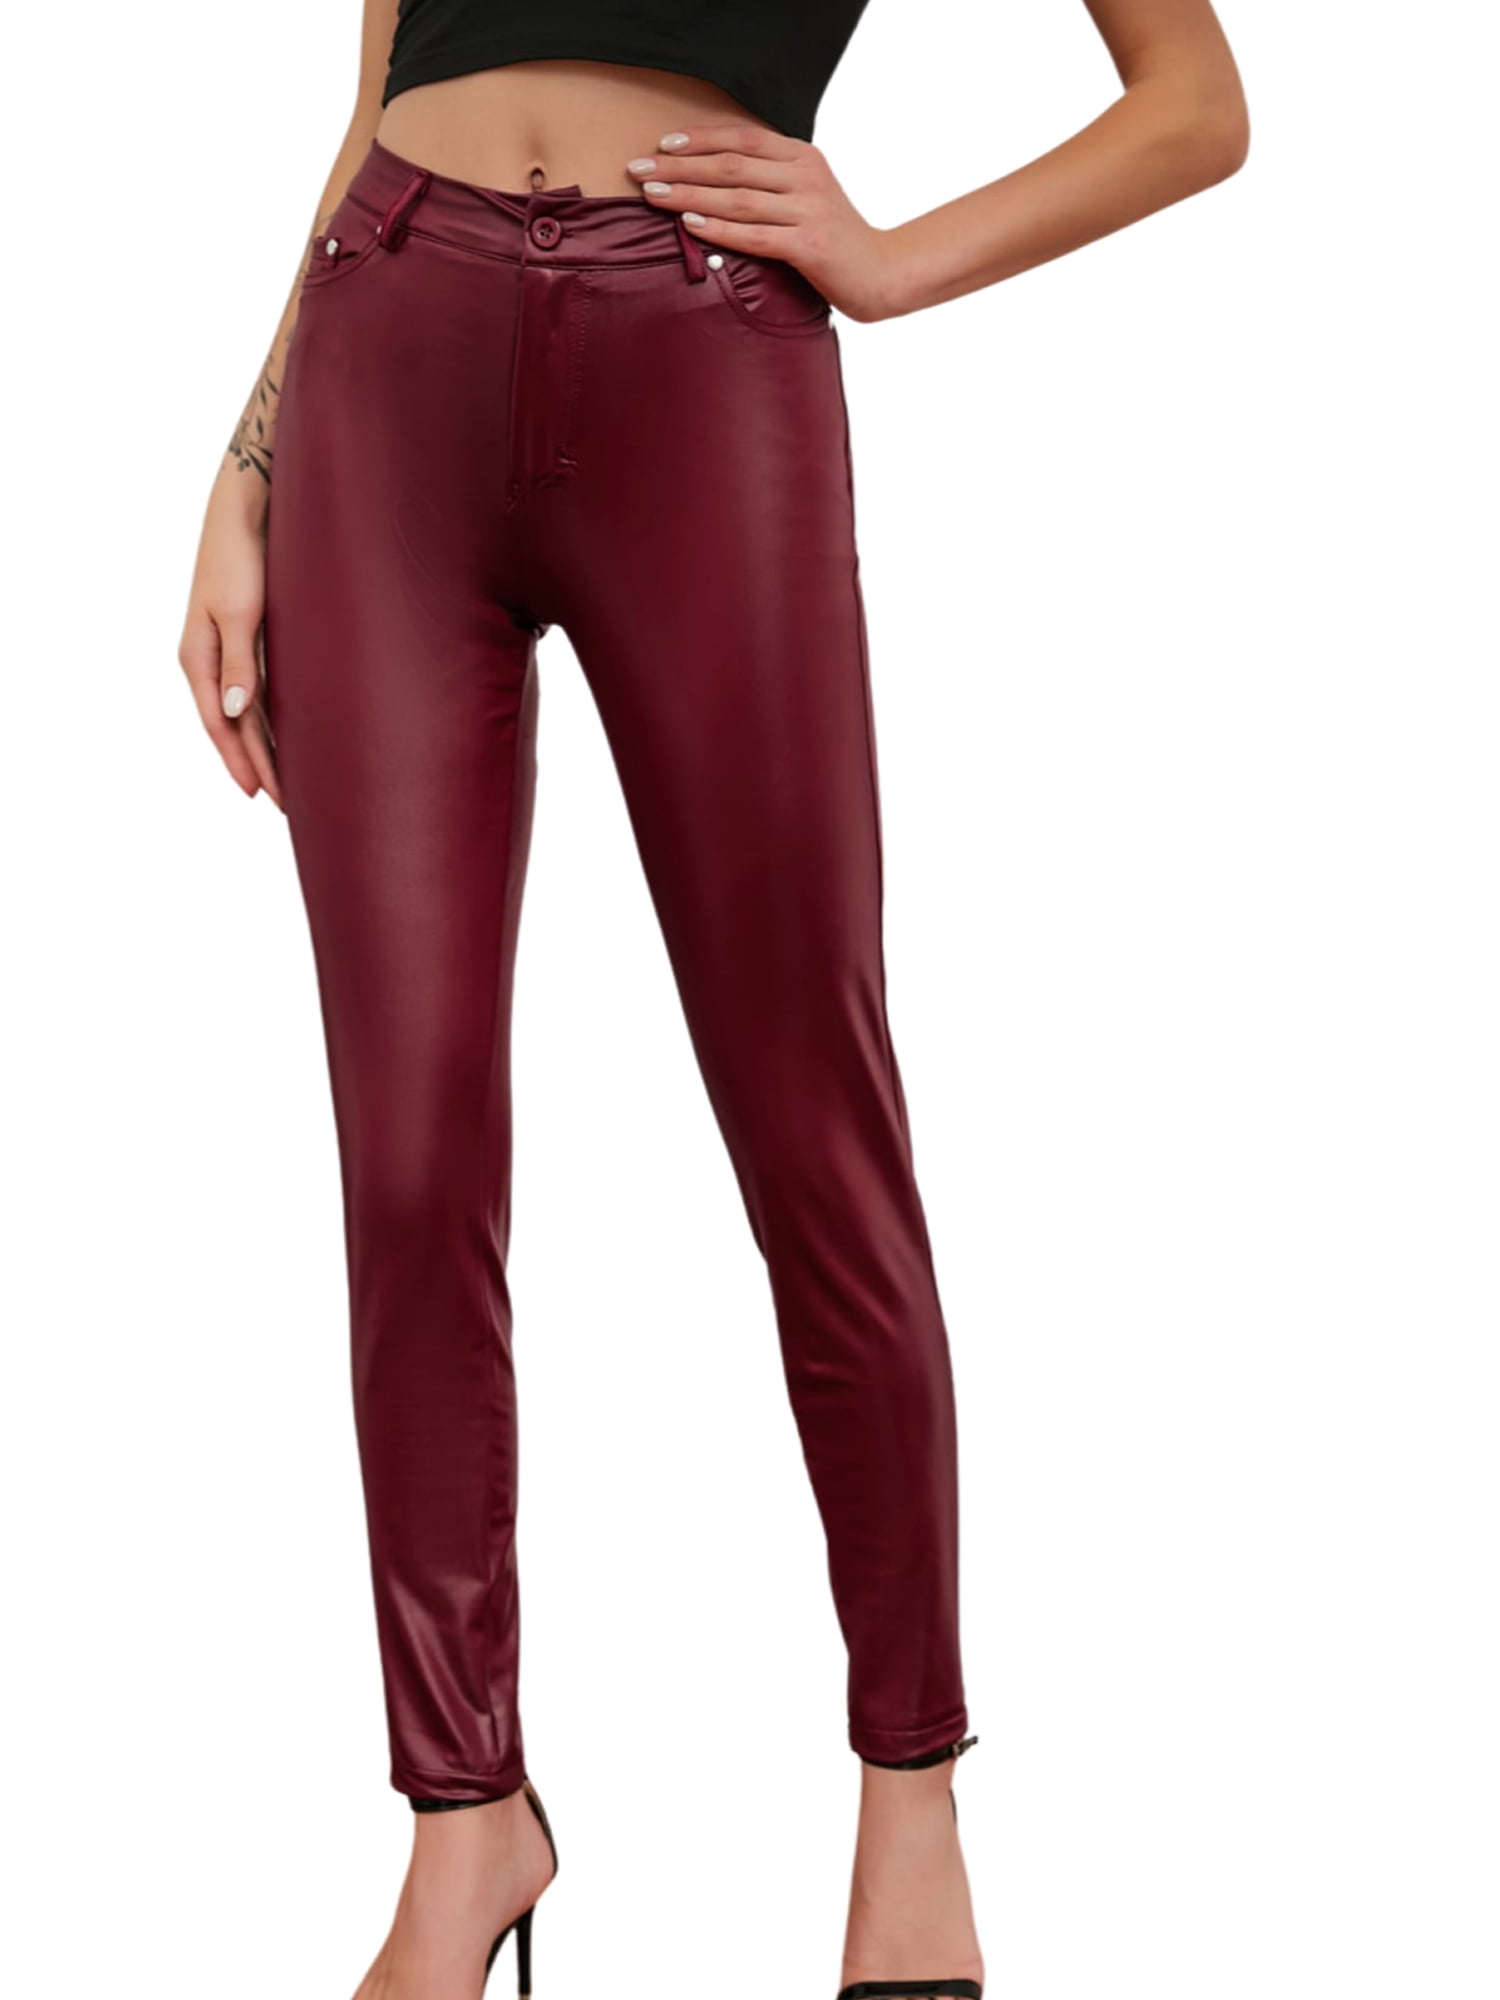 Sexy Women Faux Leather High Waisted Pencil Pants Leggings Stretchy Slim  Close-fitting Trousers with Pockets 